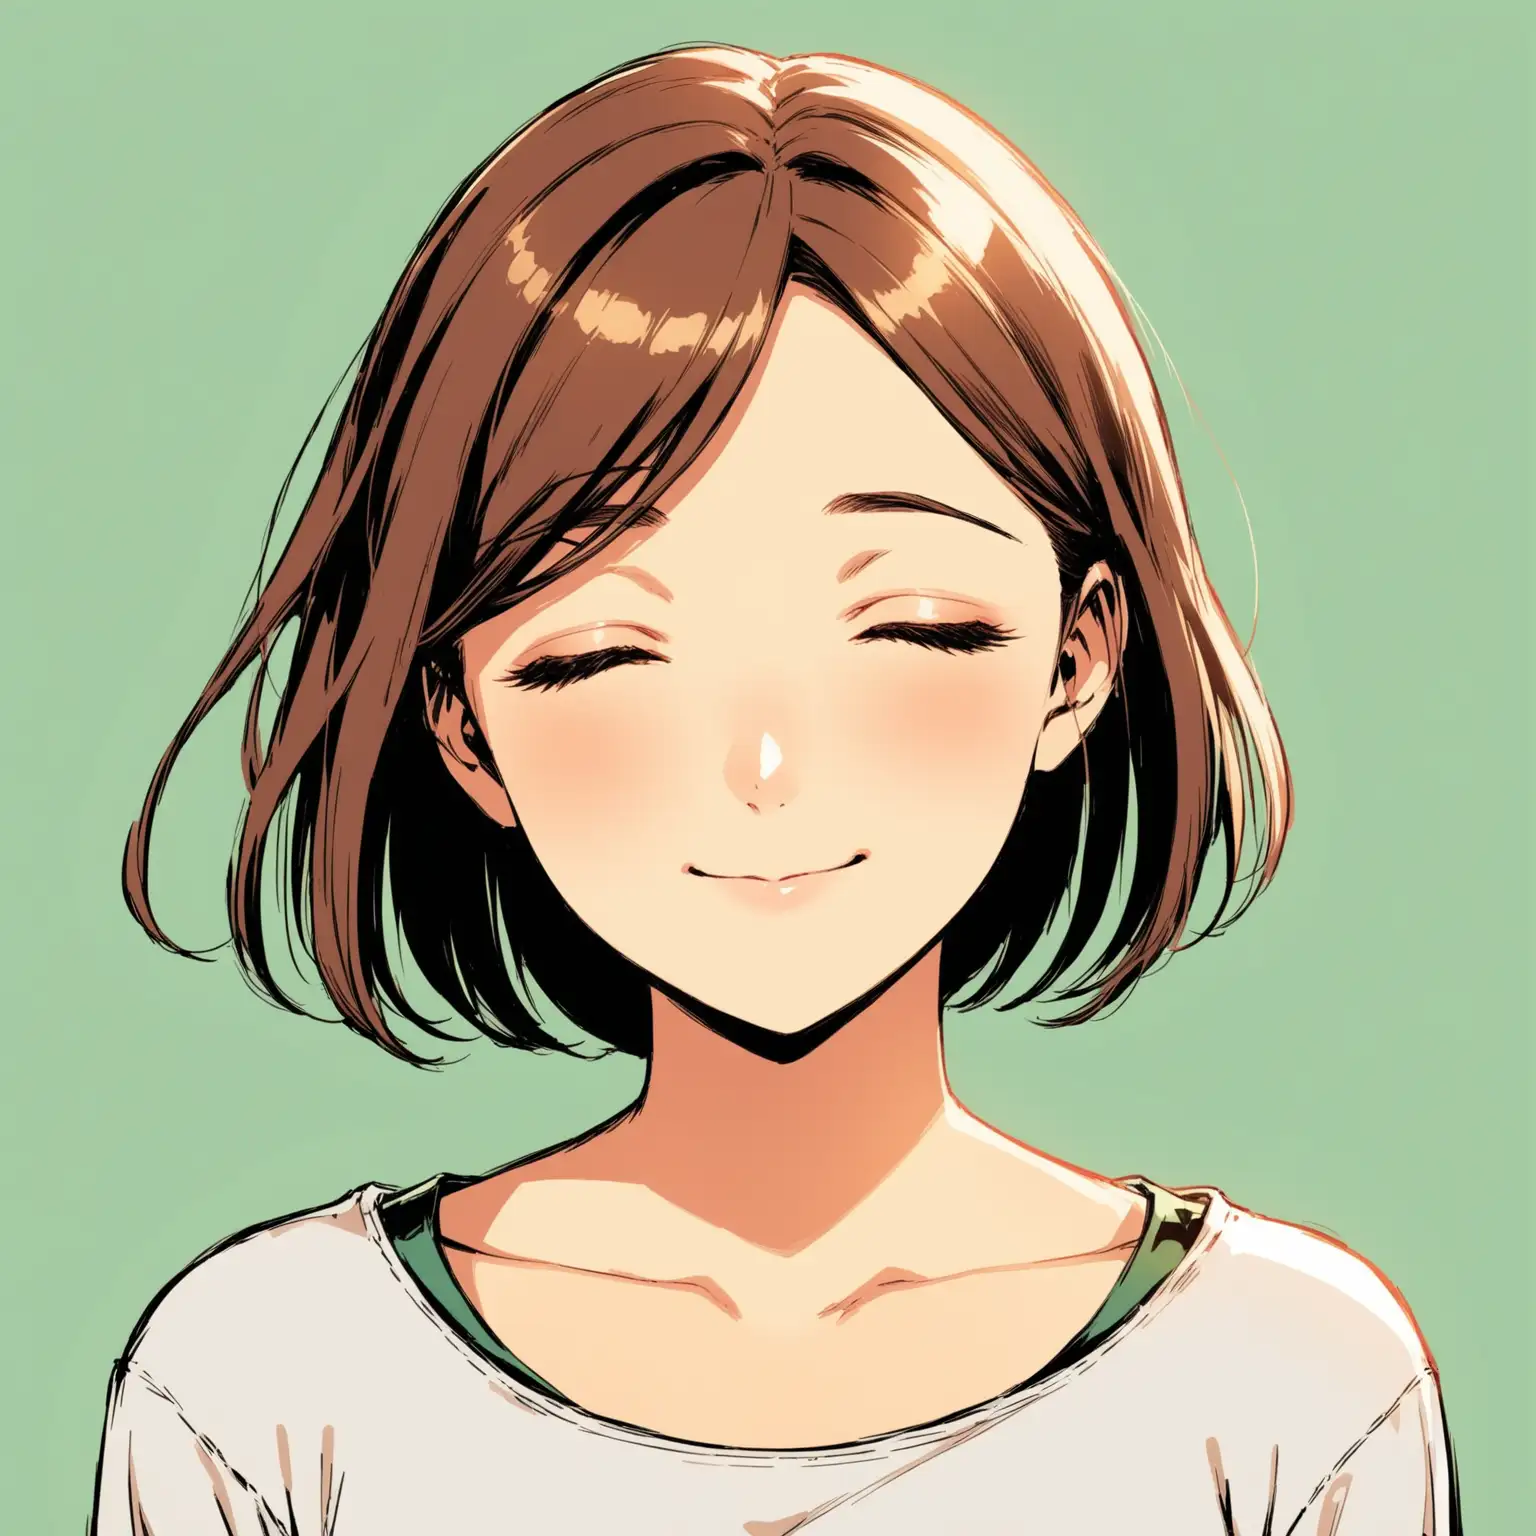 Serene Young Woman with Closed Eyes Comic Book Style